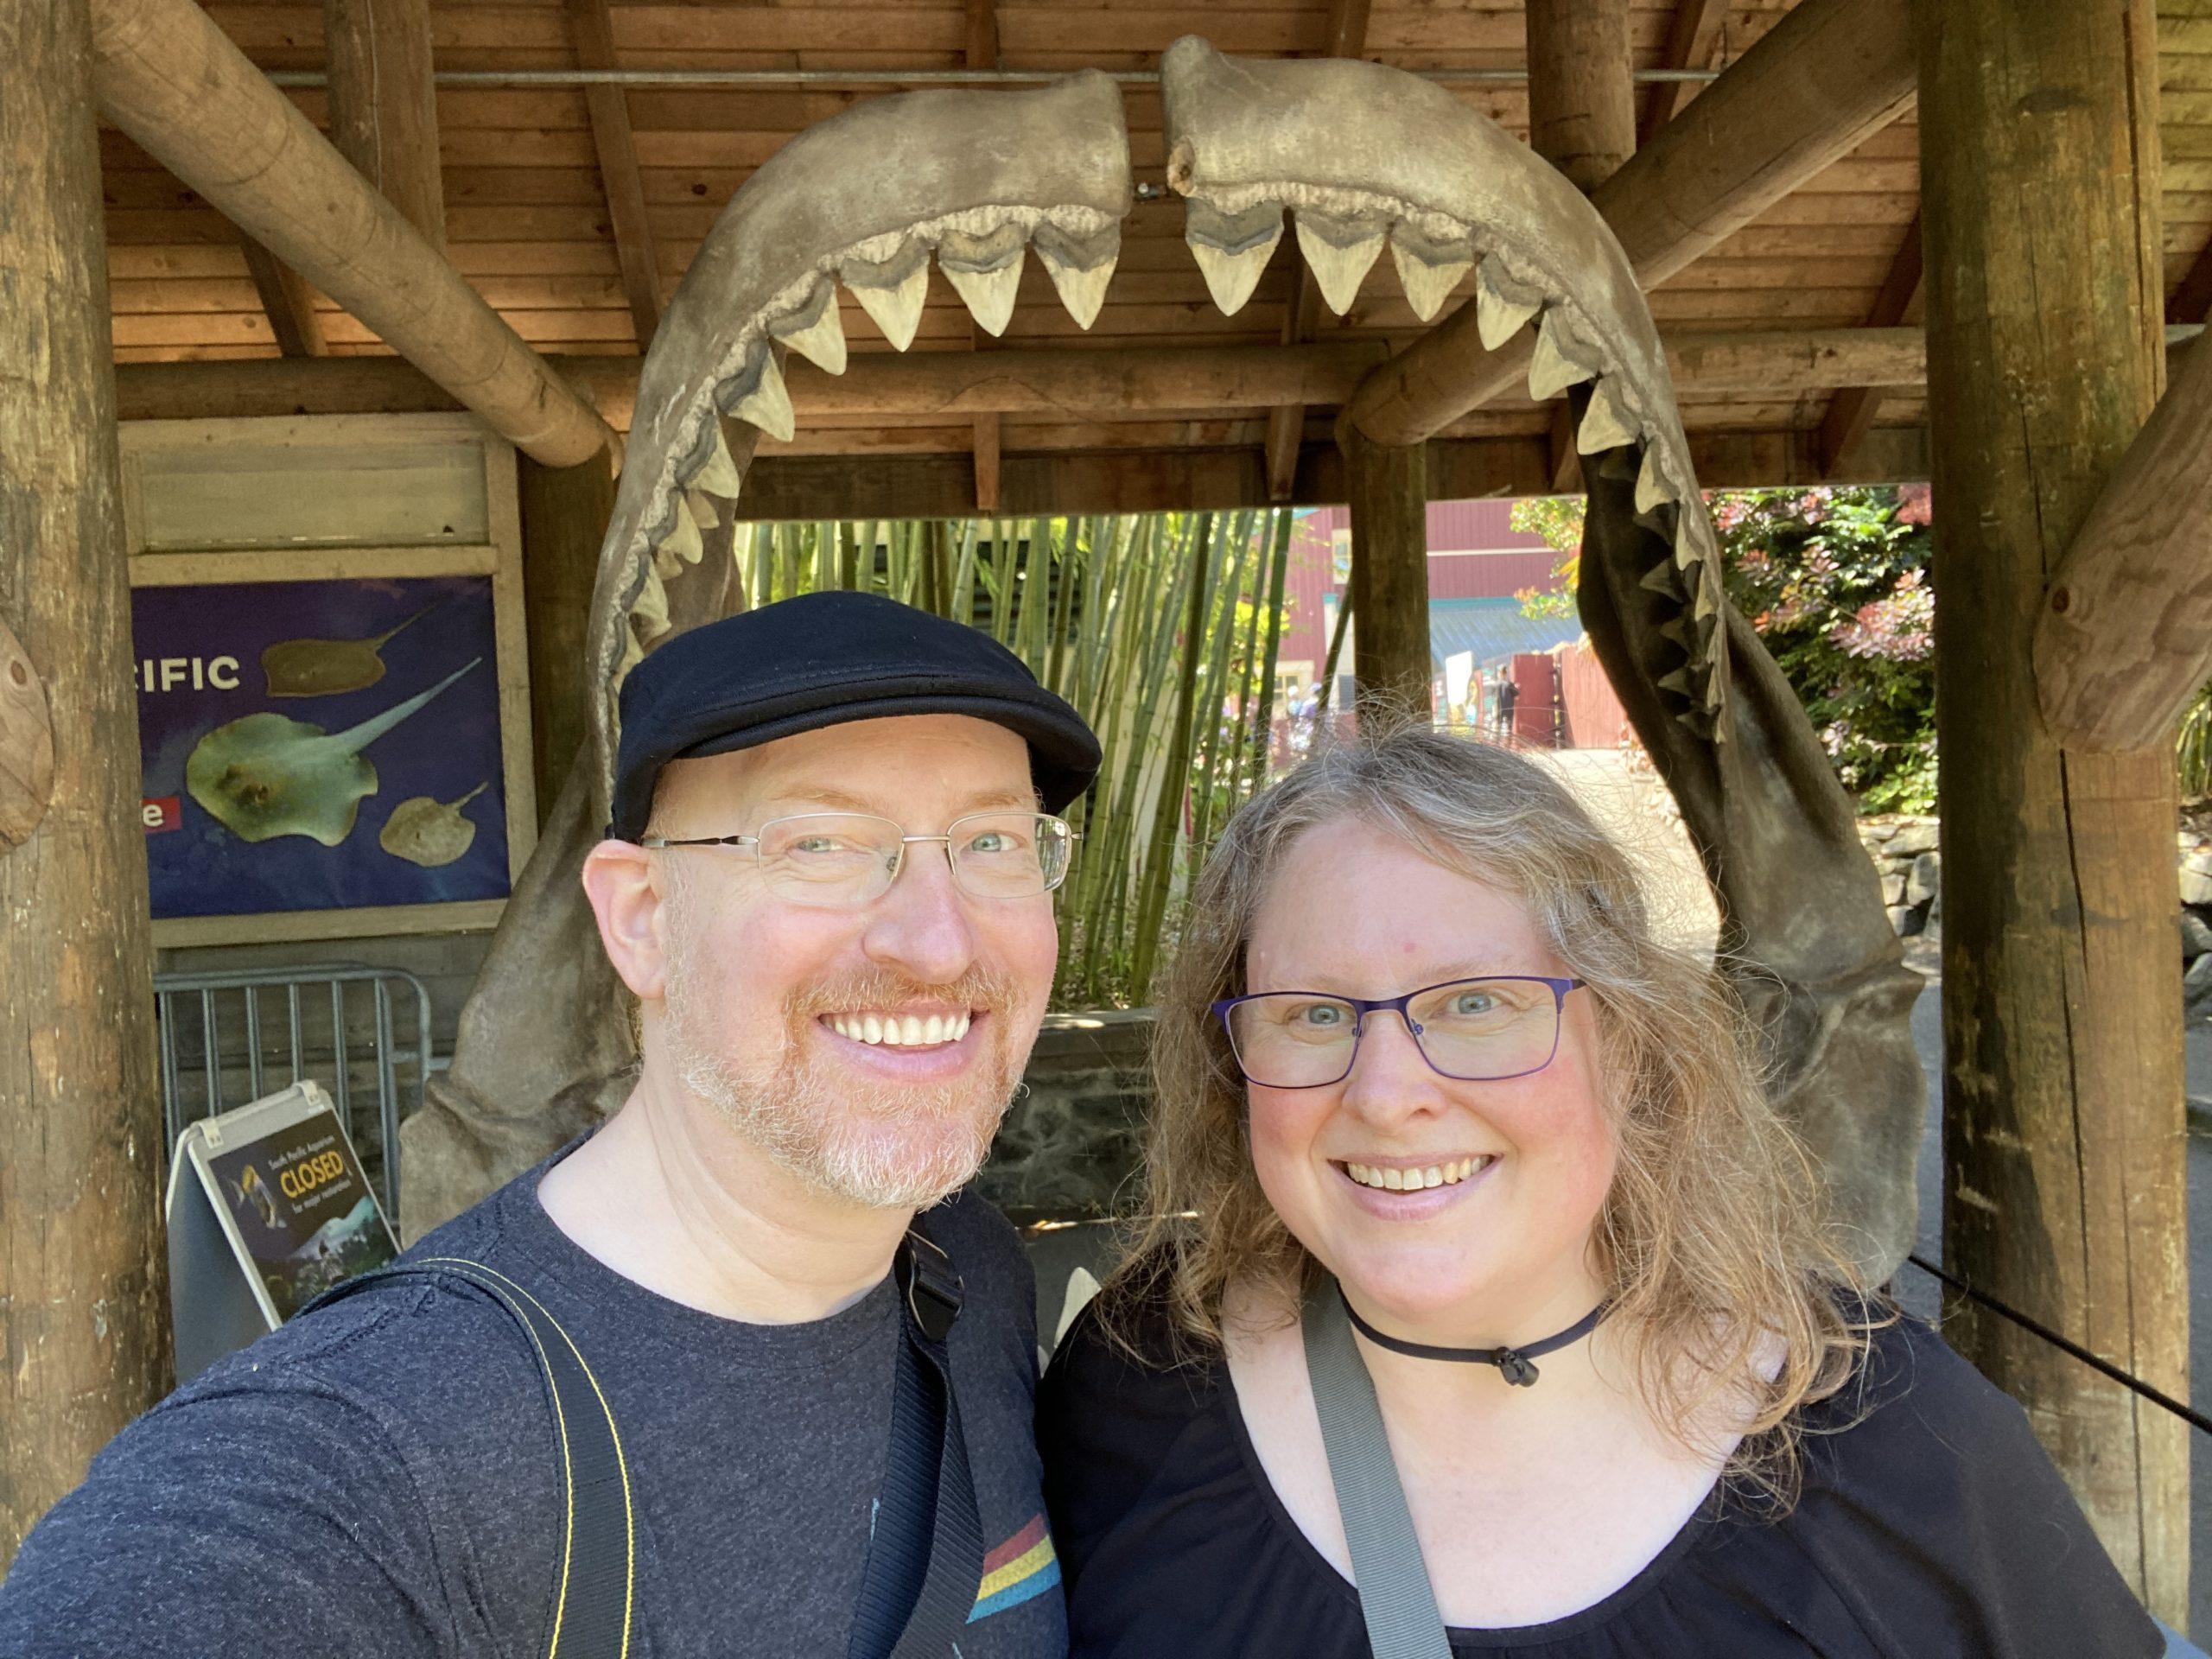 Me and my wife standing in front of a large shark's jaw.